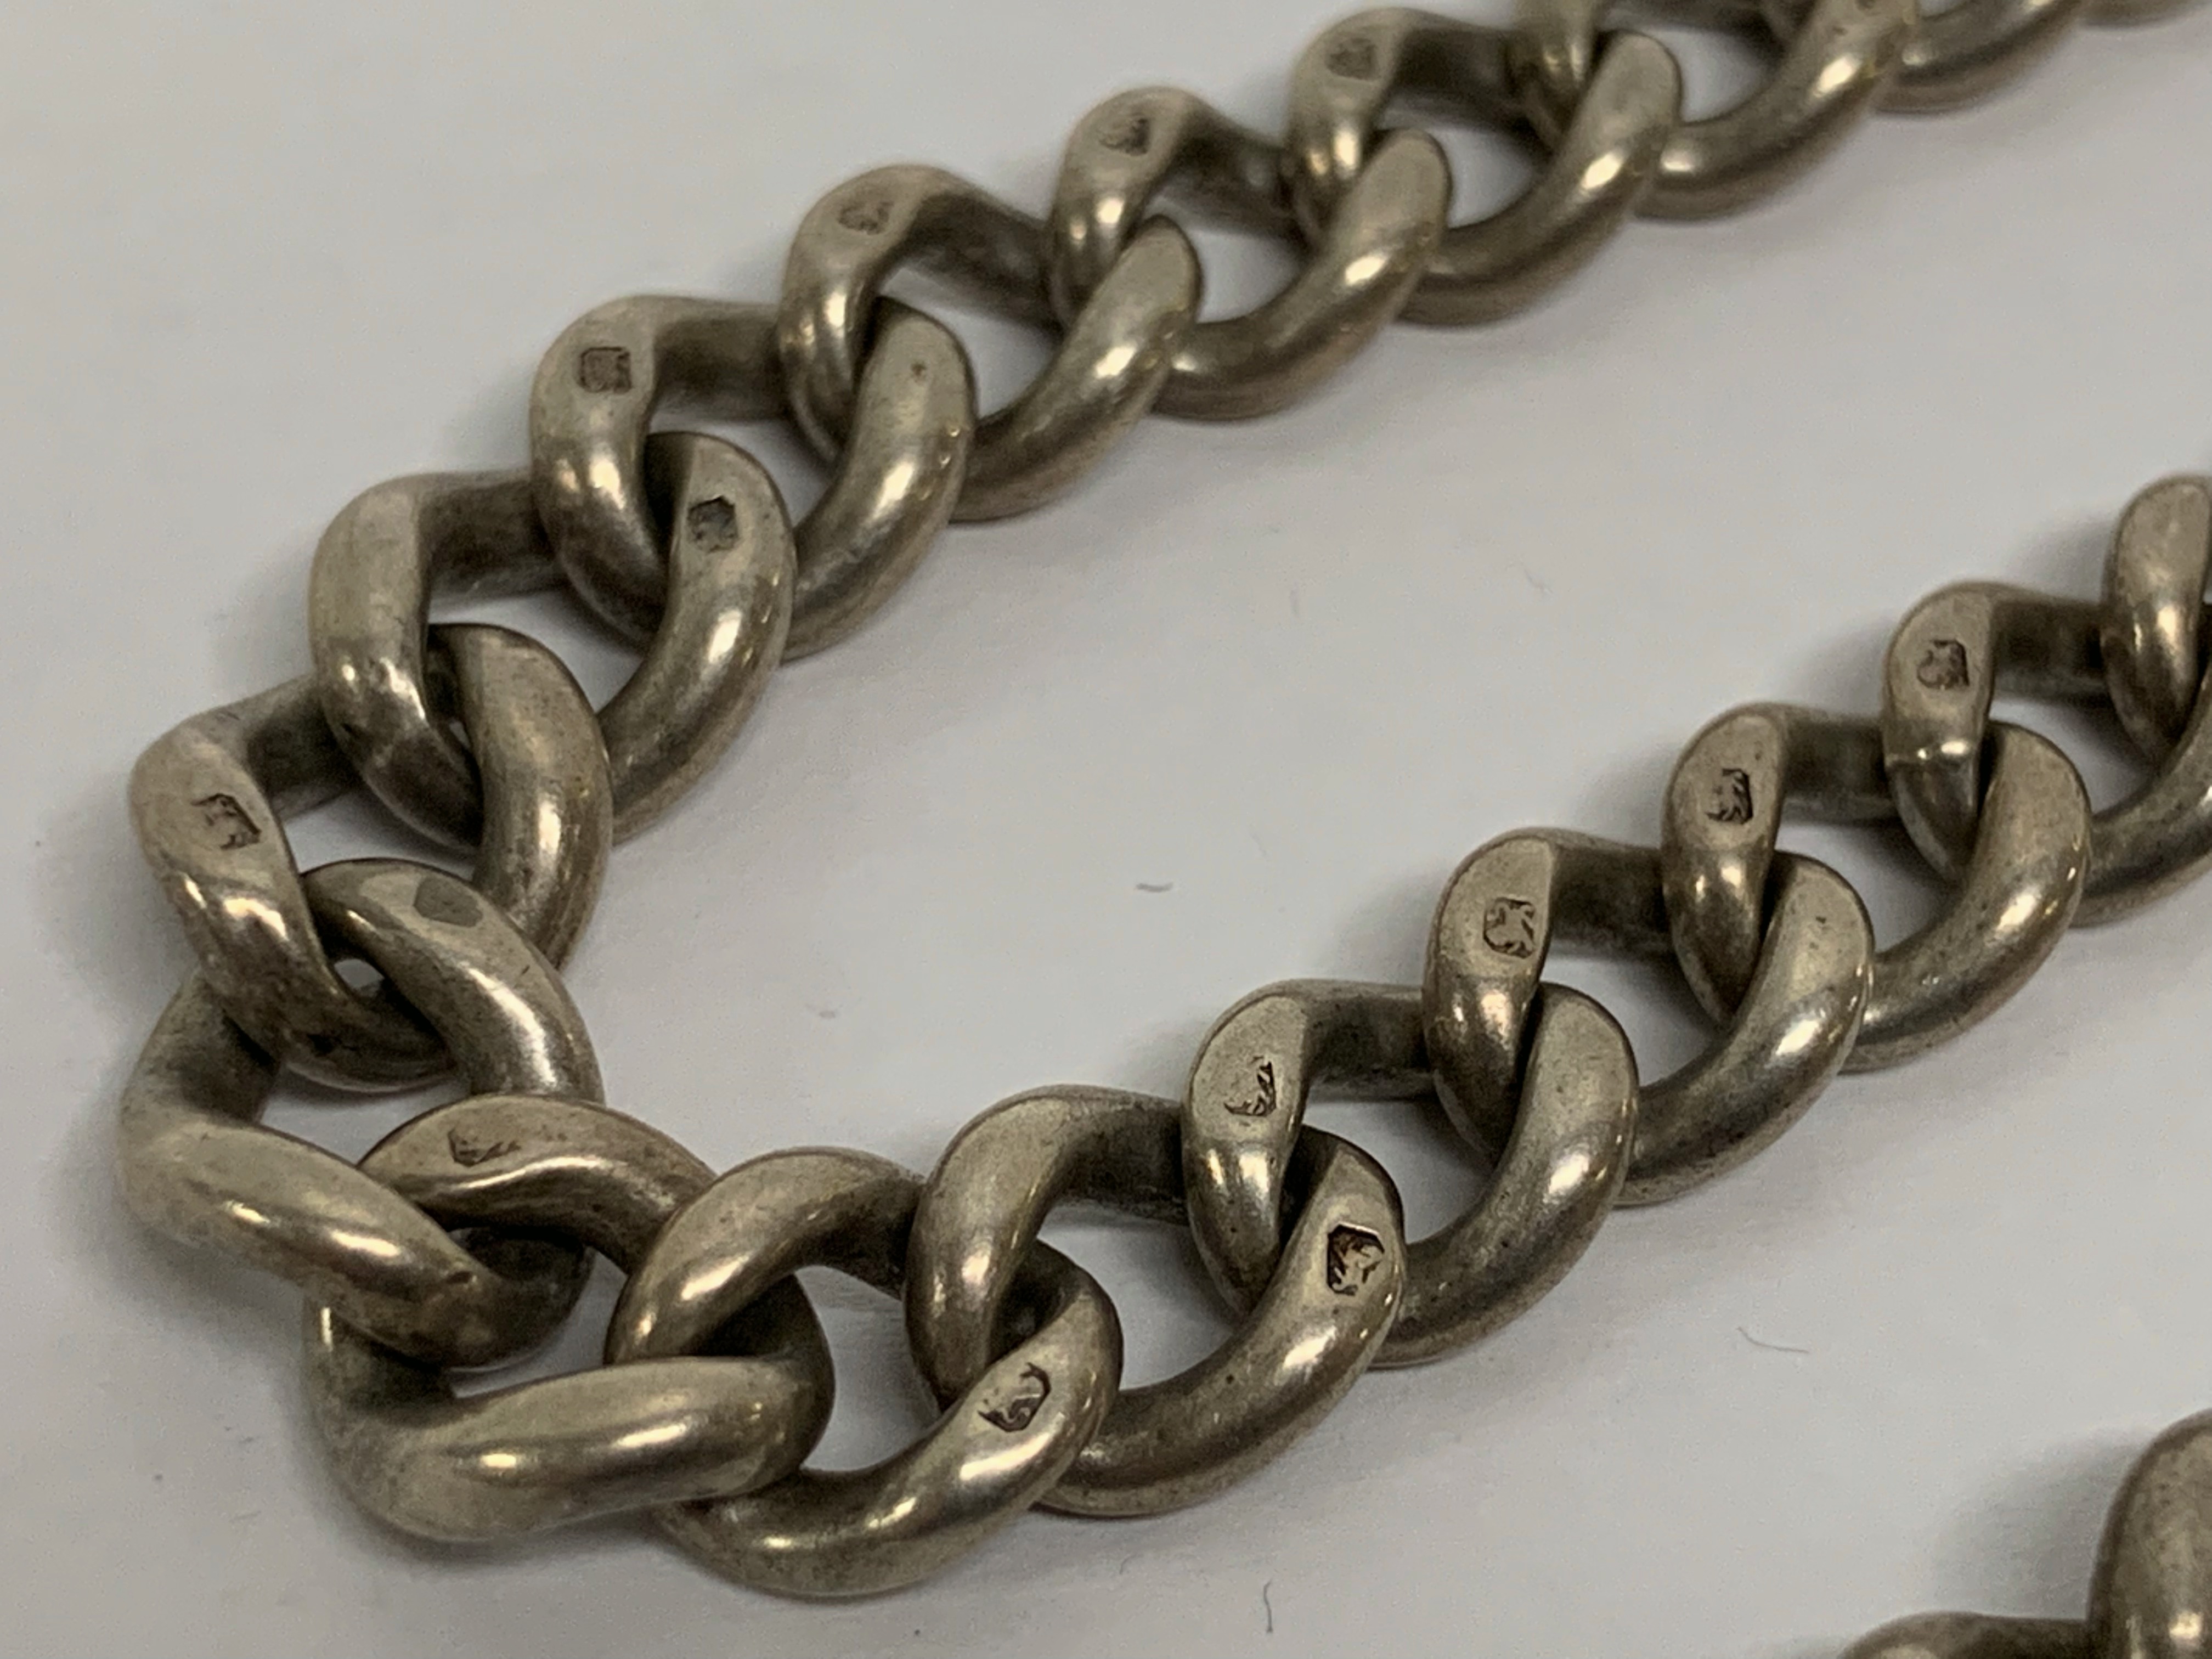 A SILVER WATCH CHAIN ALONG WITH A BROKEN SILVER CHAIN (75g in total) - Image 3 of 5